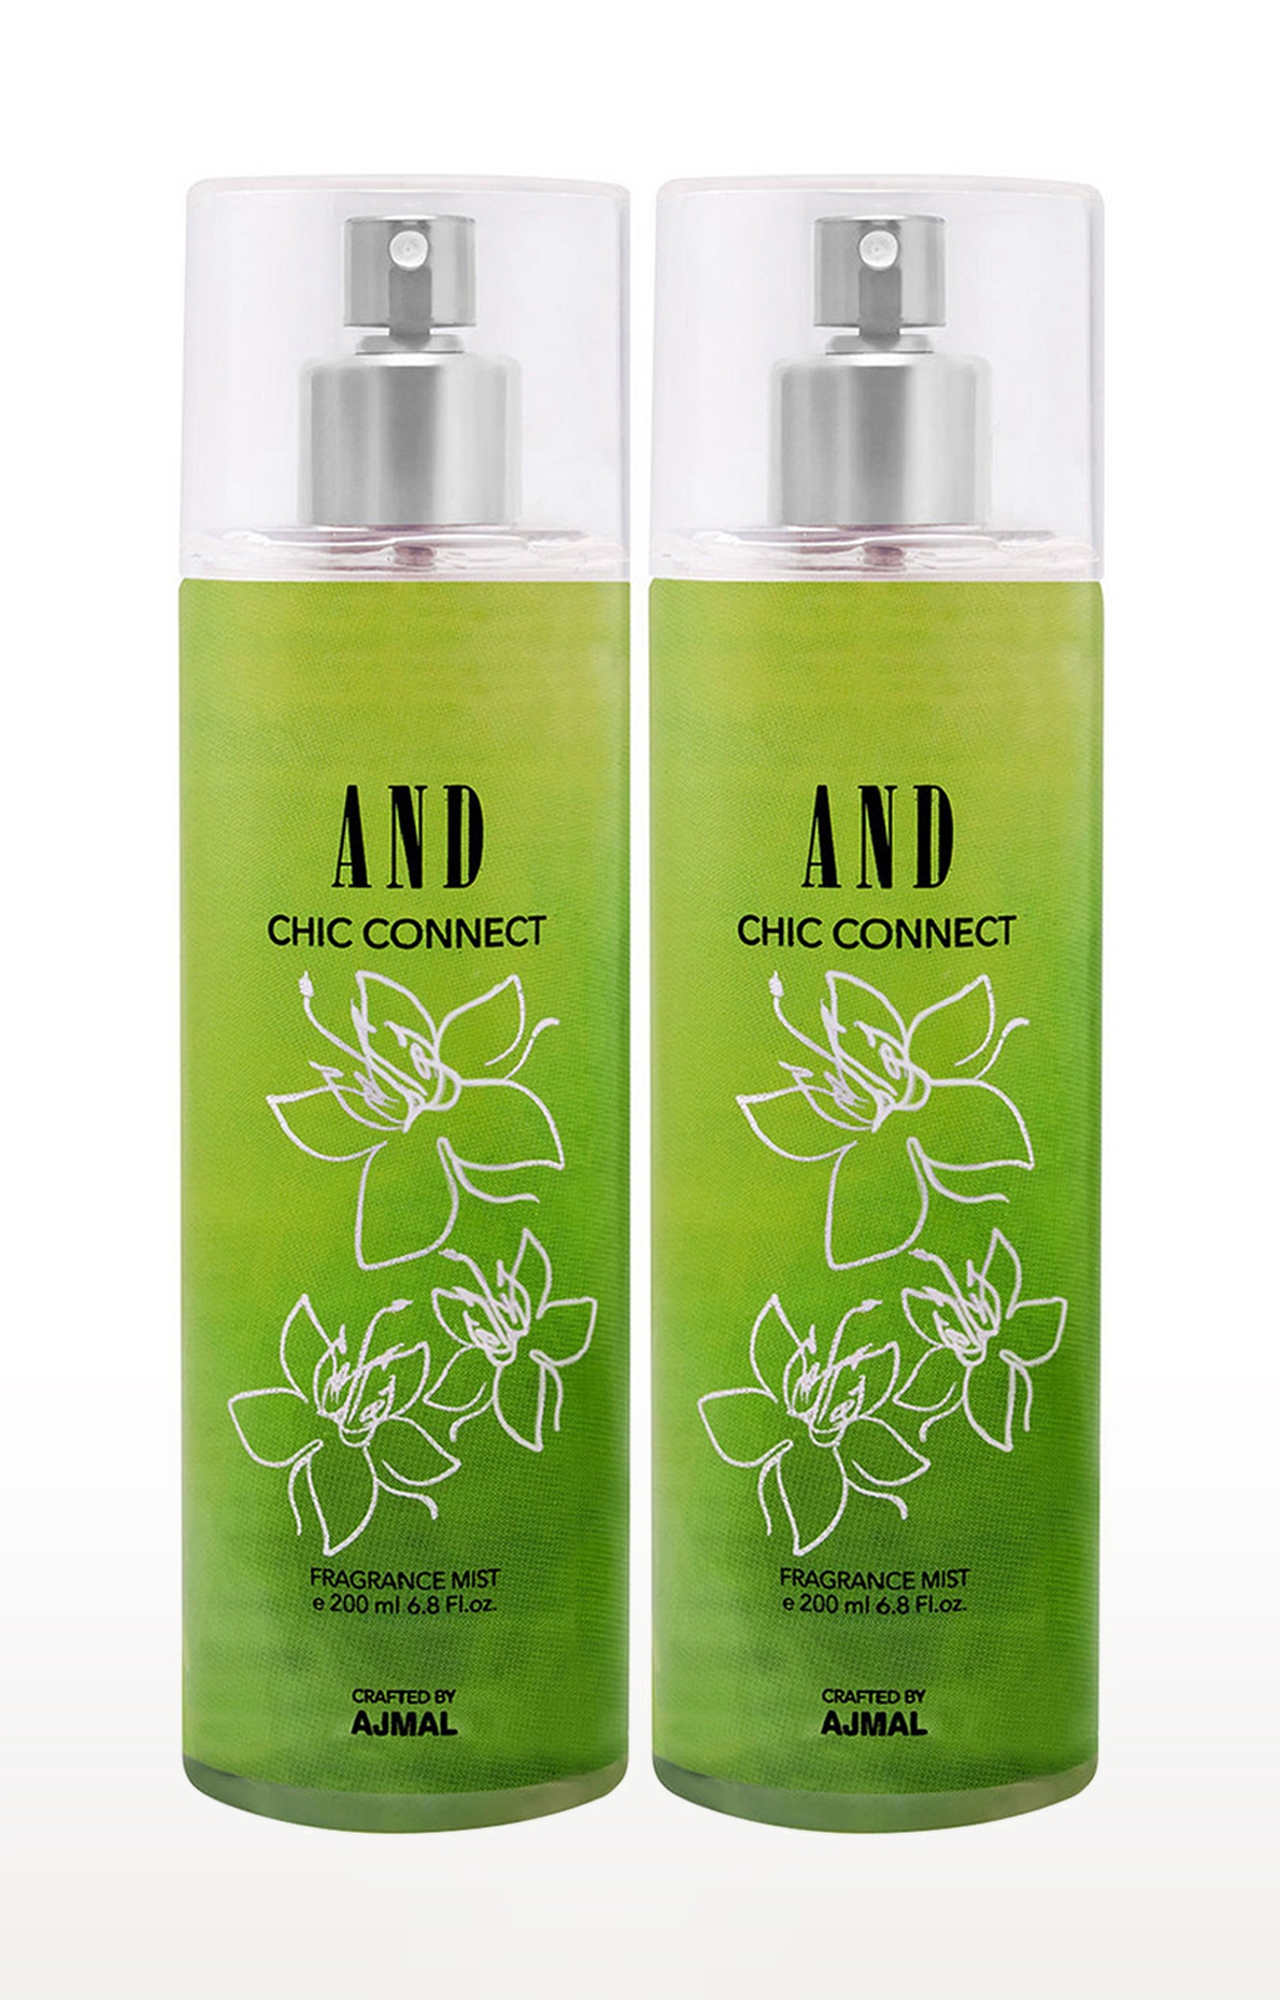 AND Chic Connect & Chic Connect Pack of 2 Body Mist 200ML each Long Lasting Scent Spray Gift For Women Perfume Crafted by Ajmal FREE